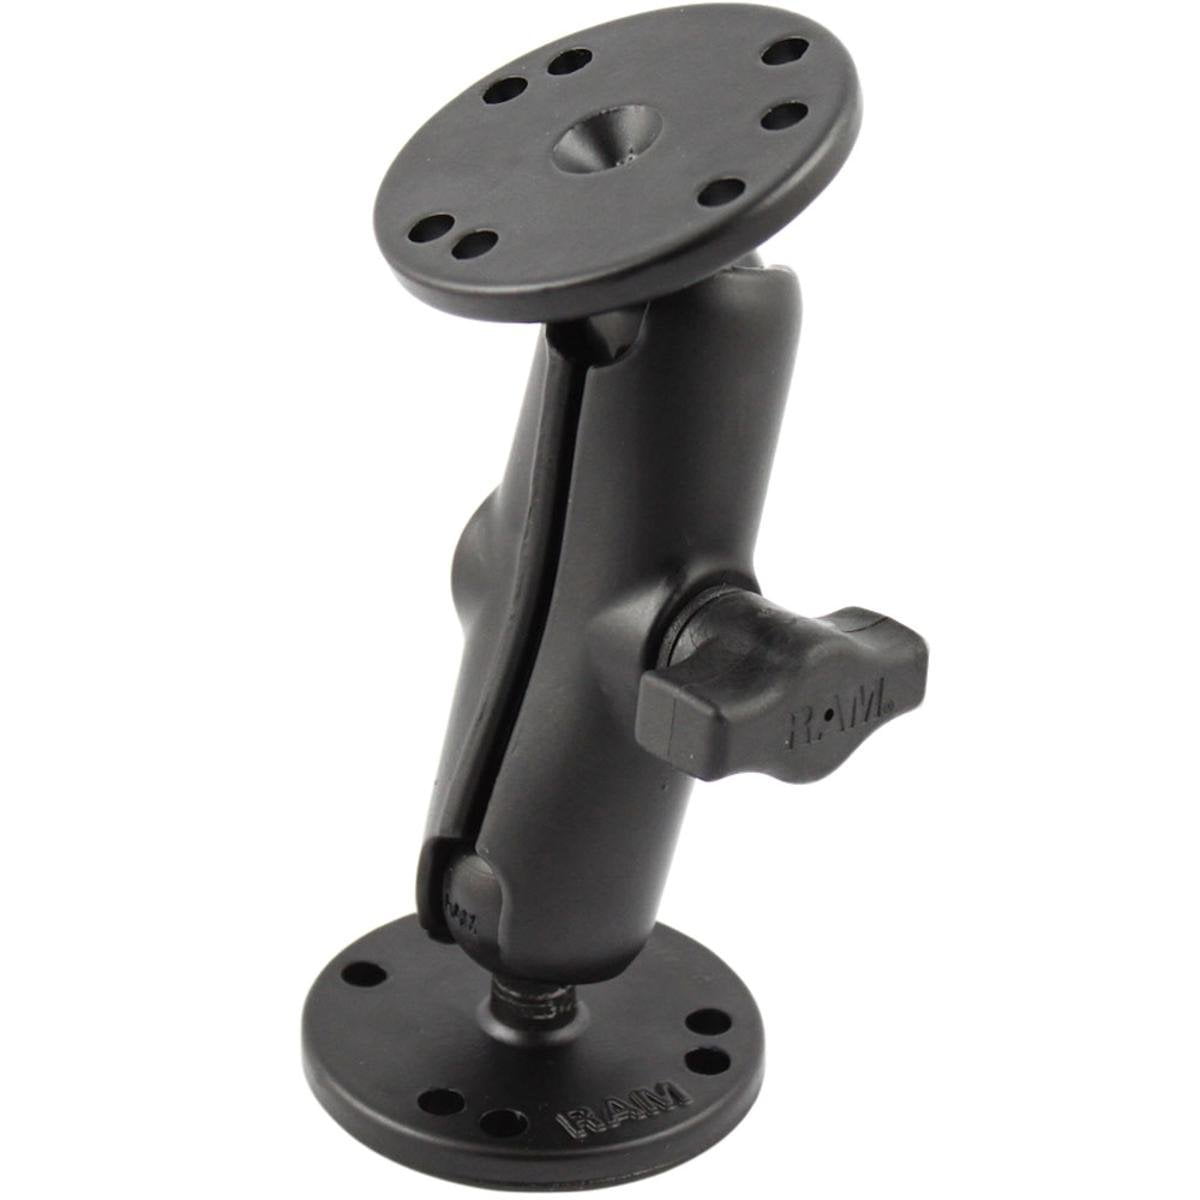 Ram Mount Motorcycle 2.5" Round Base with 1" Ball 